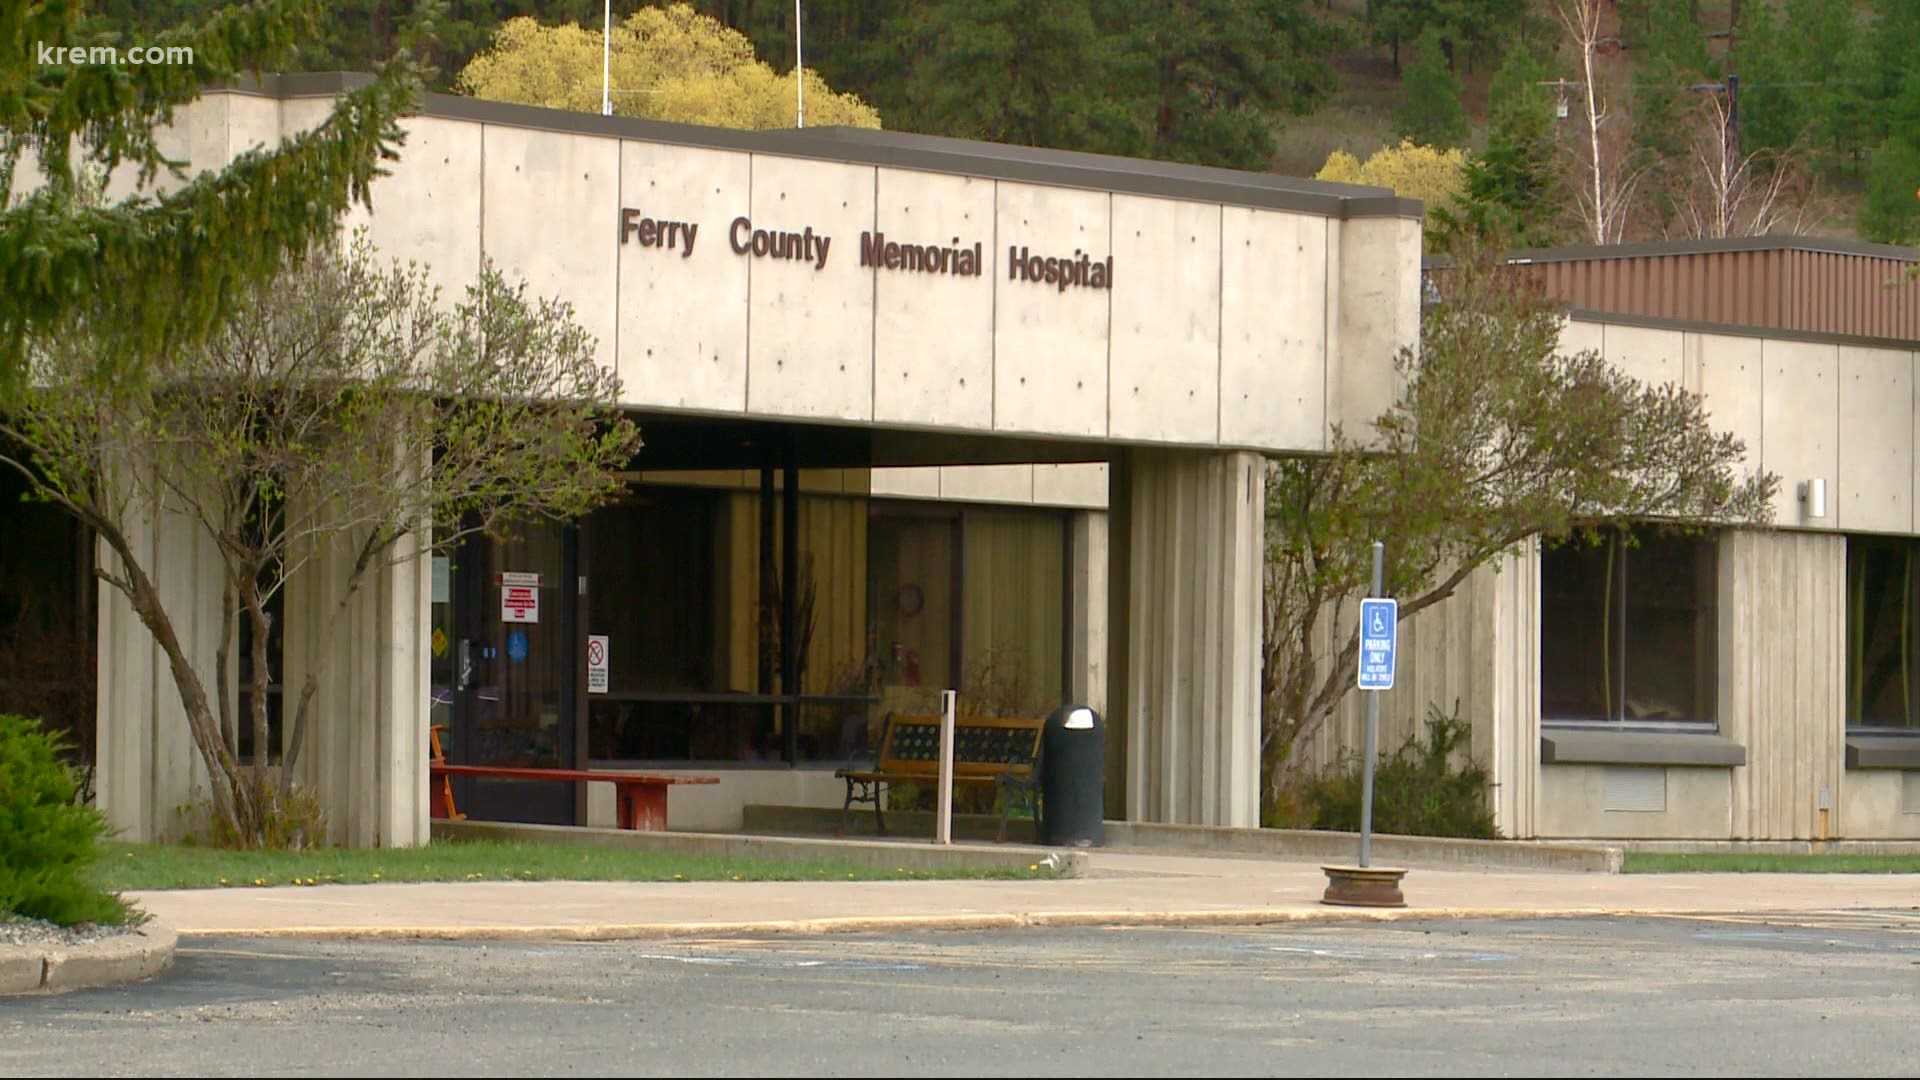 KREM's Whitney Ward visited the Ferry county town to talk to community members about the impact of the outbreak.